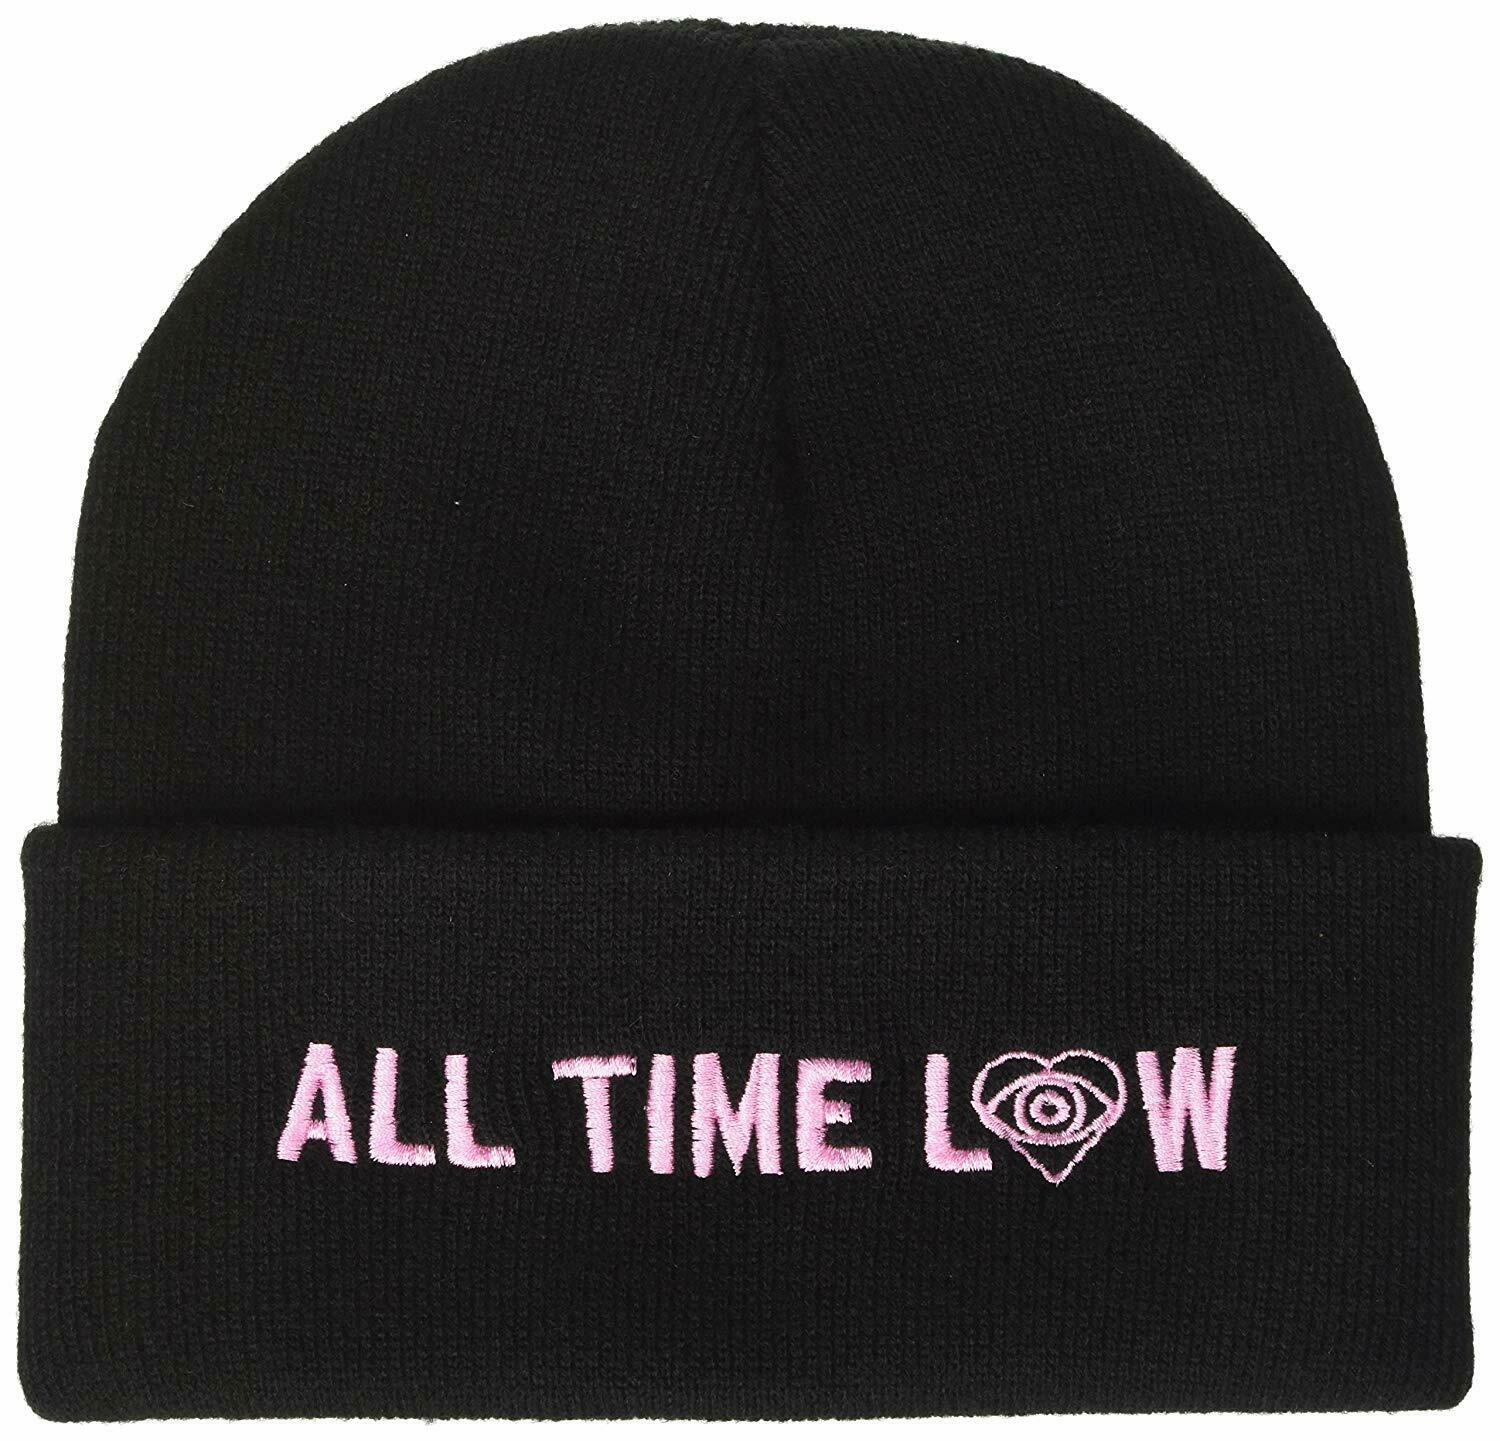 ALL TIME LOW black   beanie